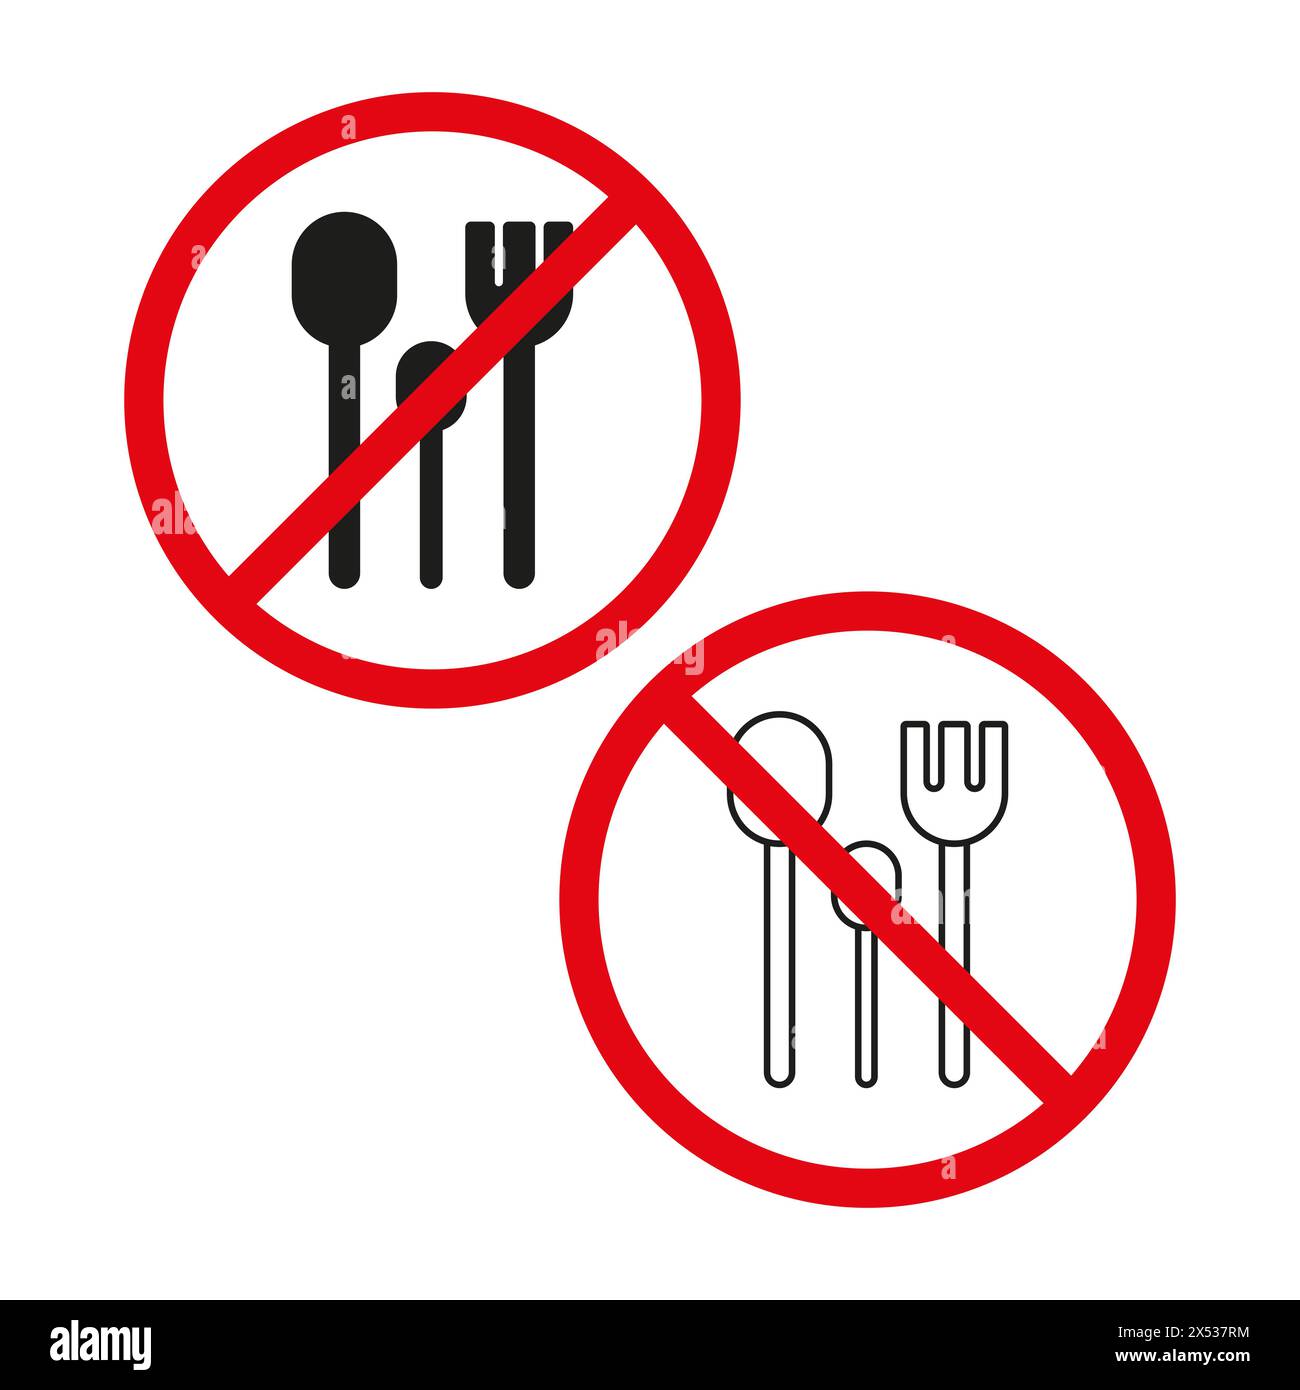 No eating allowed sign. No cutlery symbol. Prohibited fork and spoon. Vector illustration. EPS 10. Stock Vector